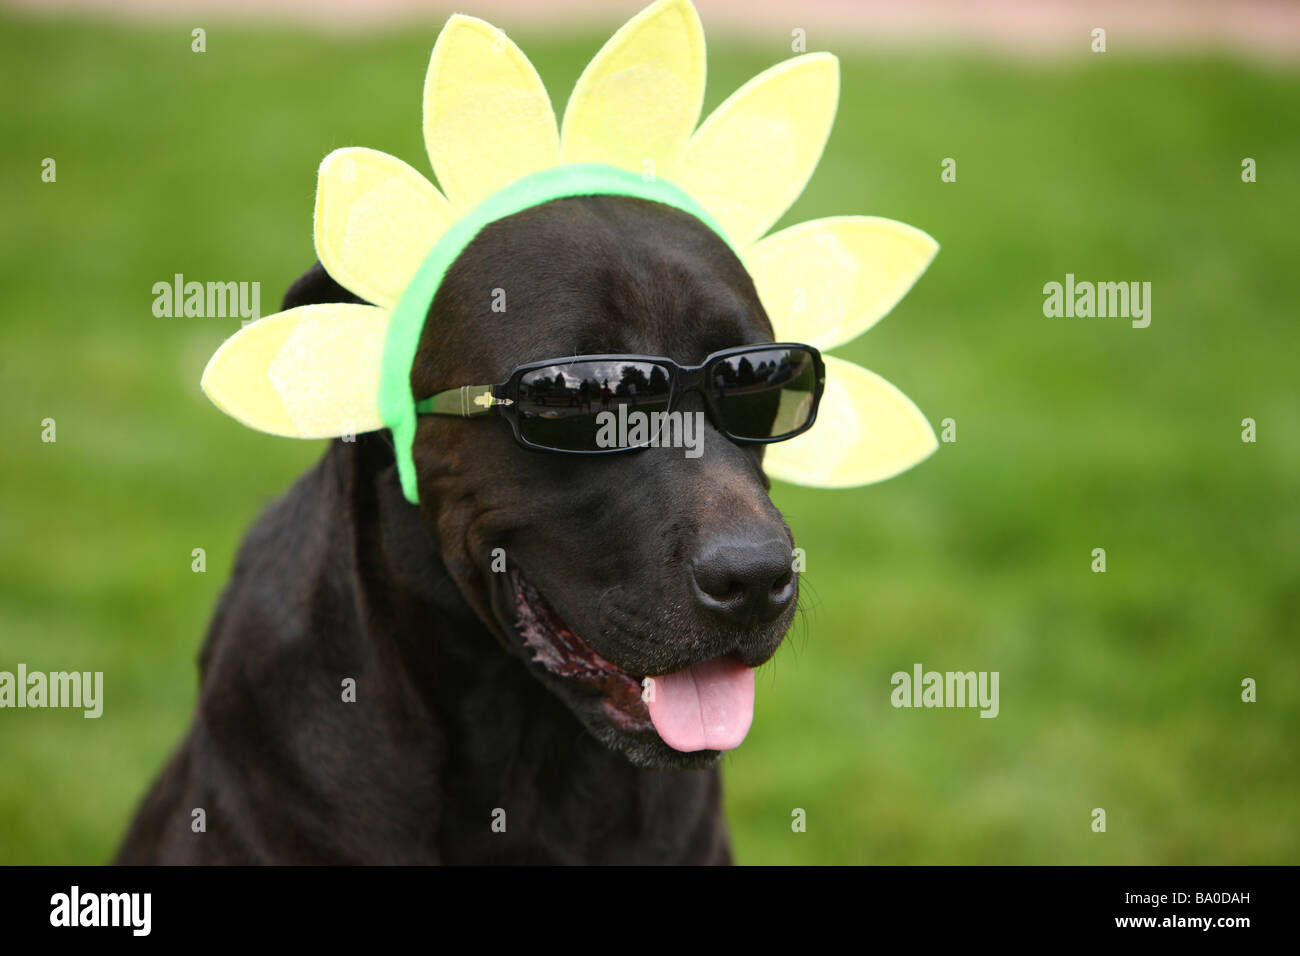 Dog wearing funny hat and sunglasses Stock Photo